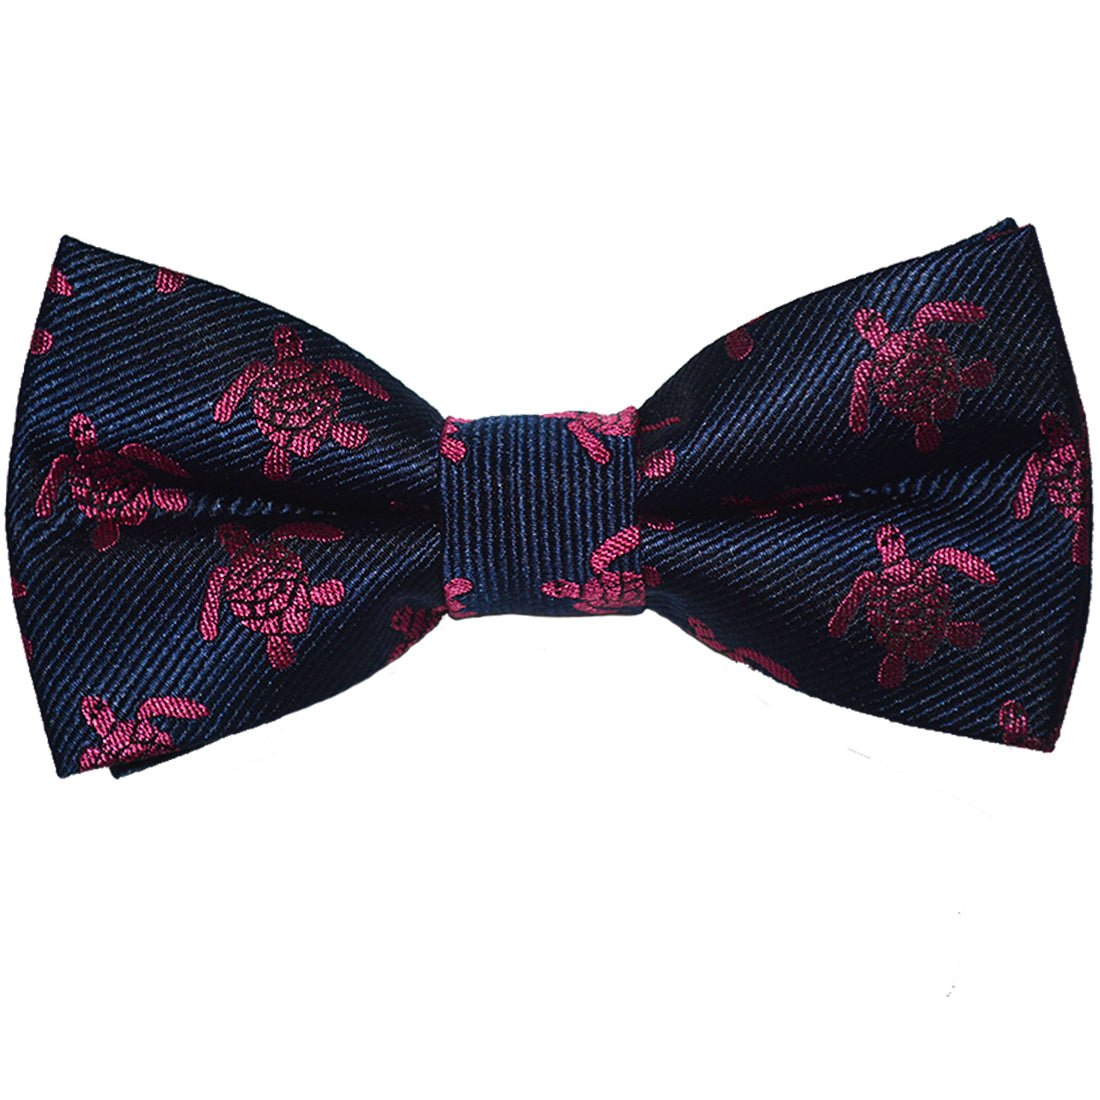 Turtle Bow Tie - Pink on Navy, Woven Silk, Pre-Tied for Kids - SummerTies